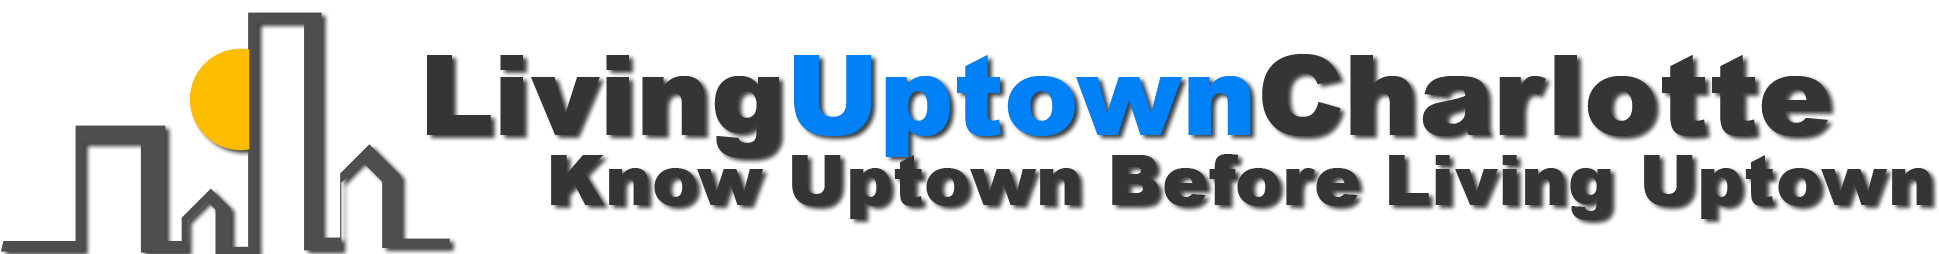 Company Logo For Uptown Charlotte Condos'